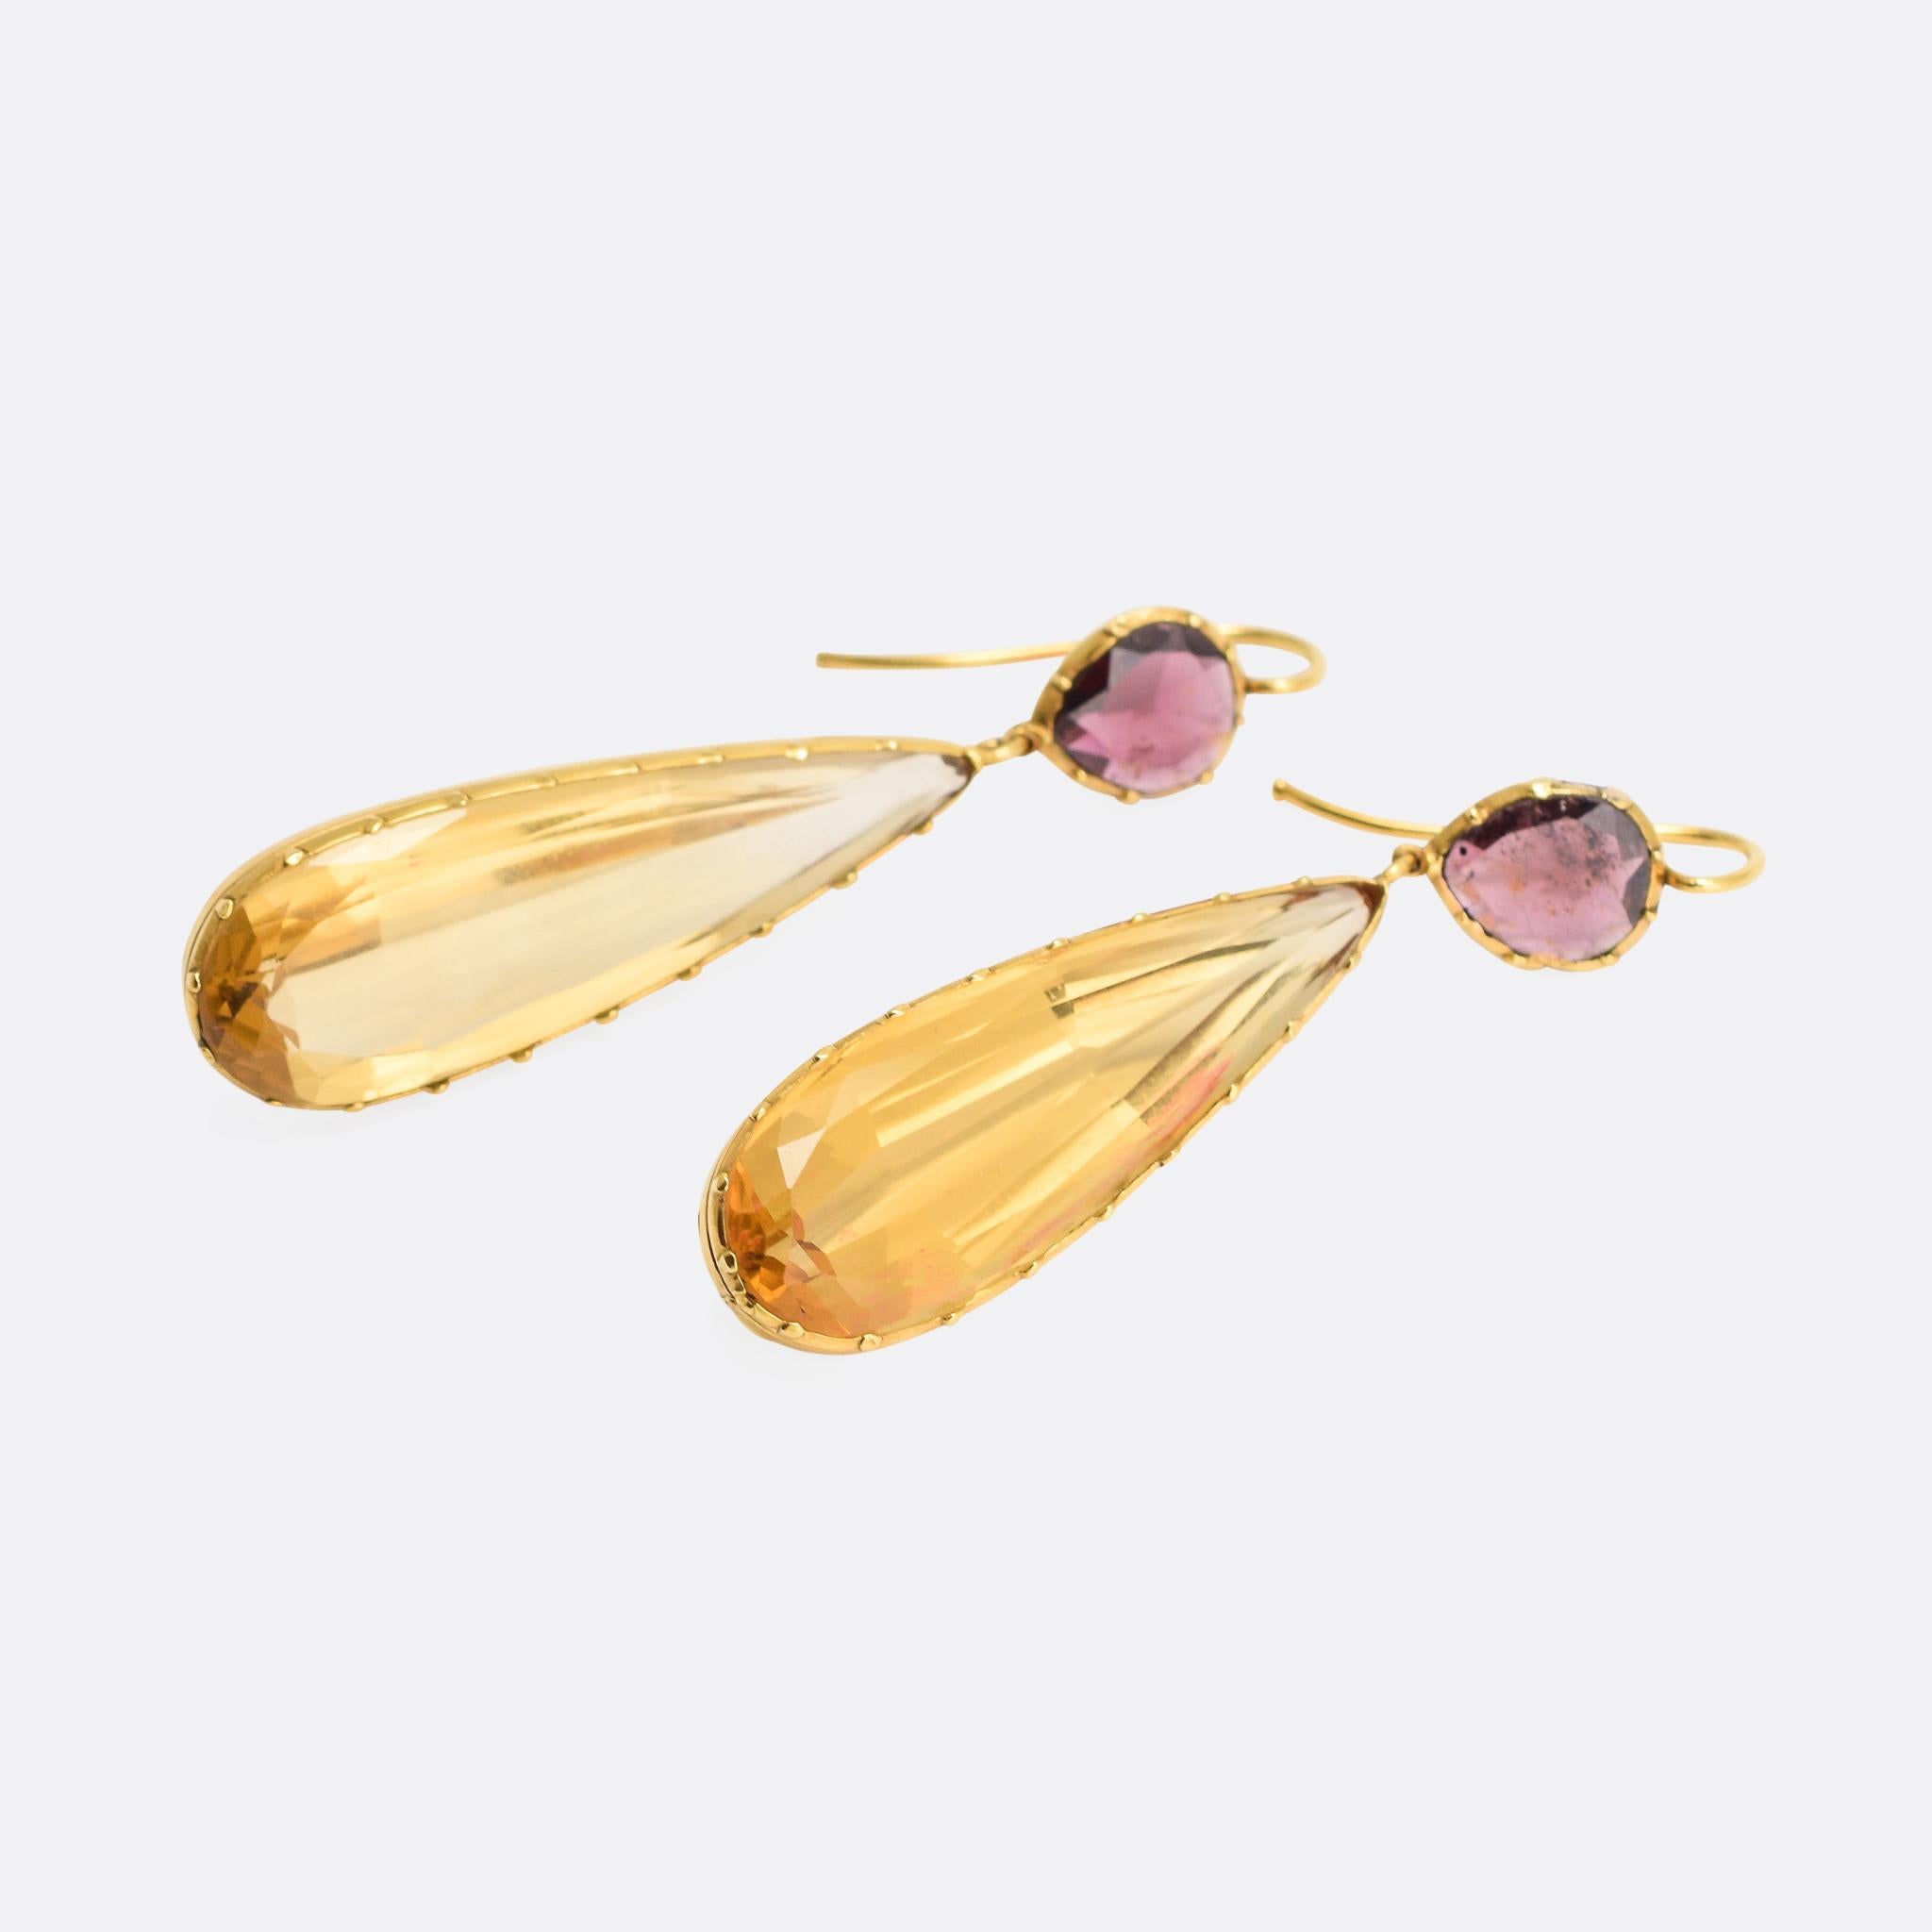 A sublime pair of Georgian drop earrings, each set with a long pear-shaped citrine dangling beneath a flat-cut almandine garnet - the total length is 5.2cm. The stones rest in cut down collet settings, very typical of the era; fashioned in 15 karat